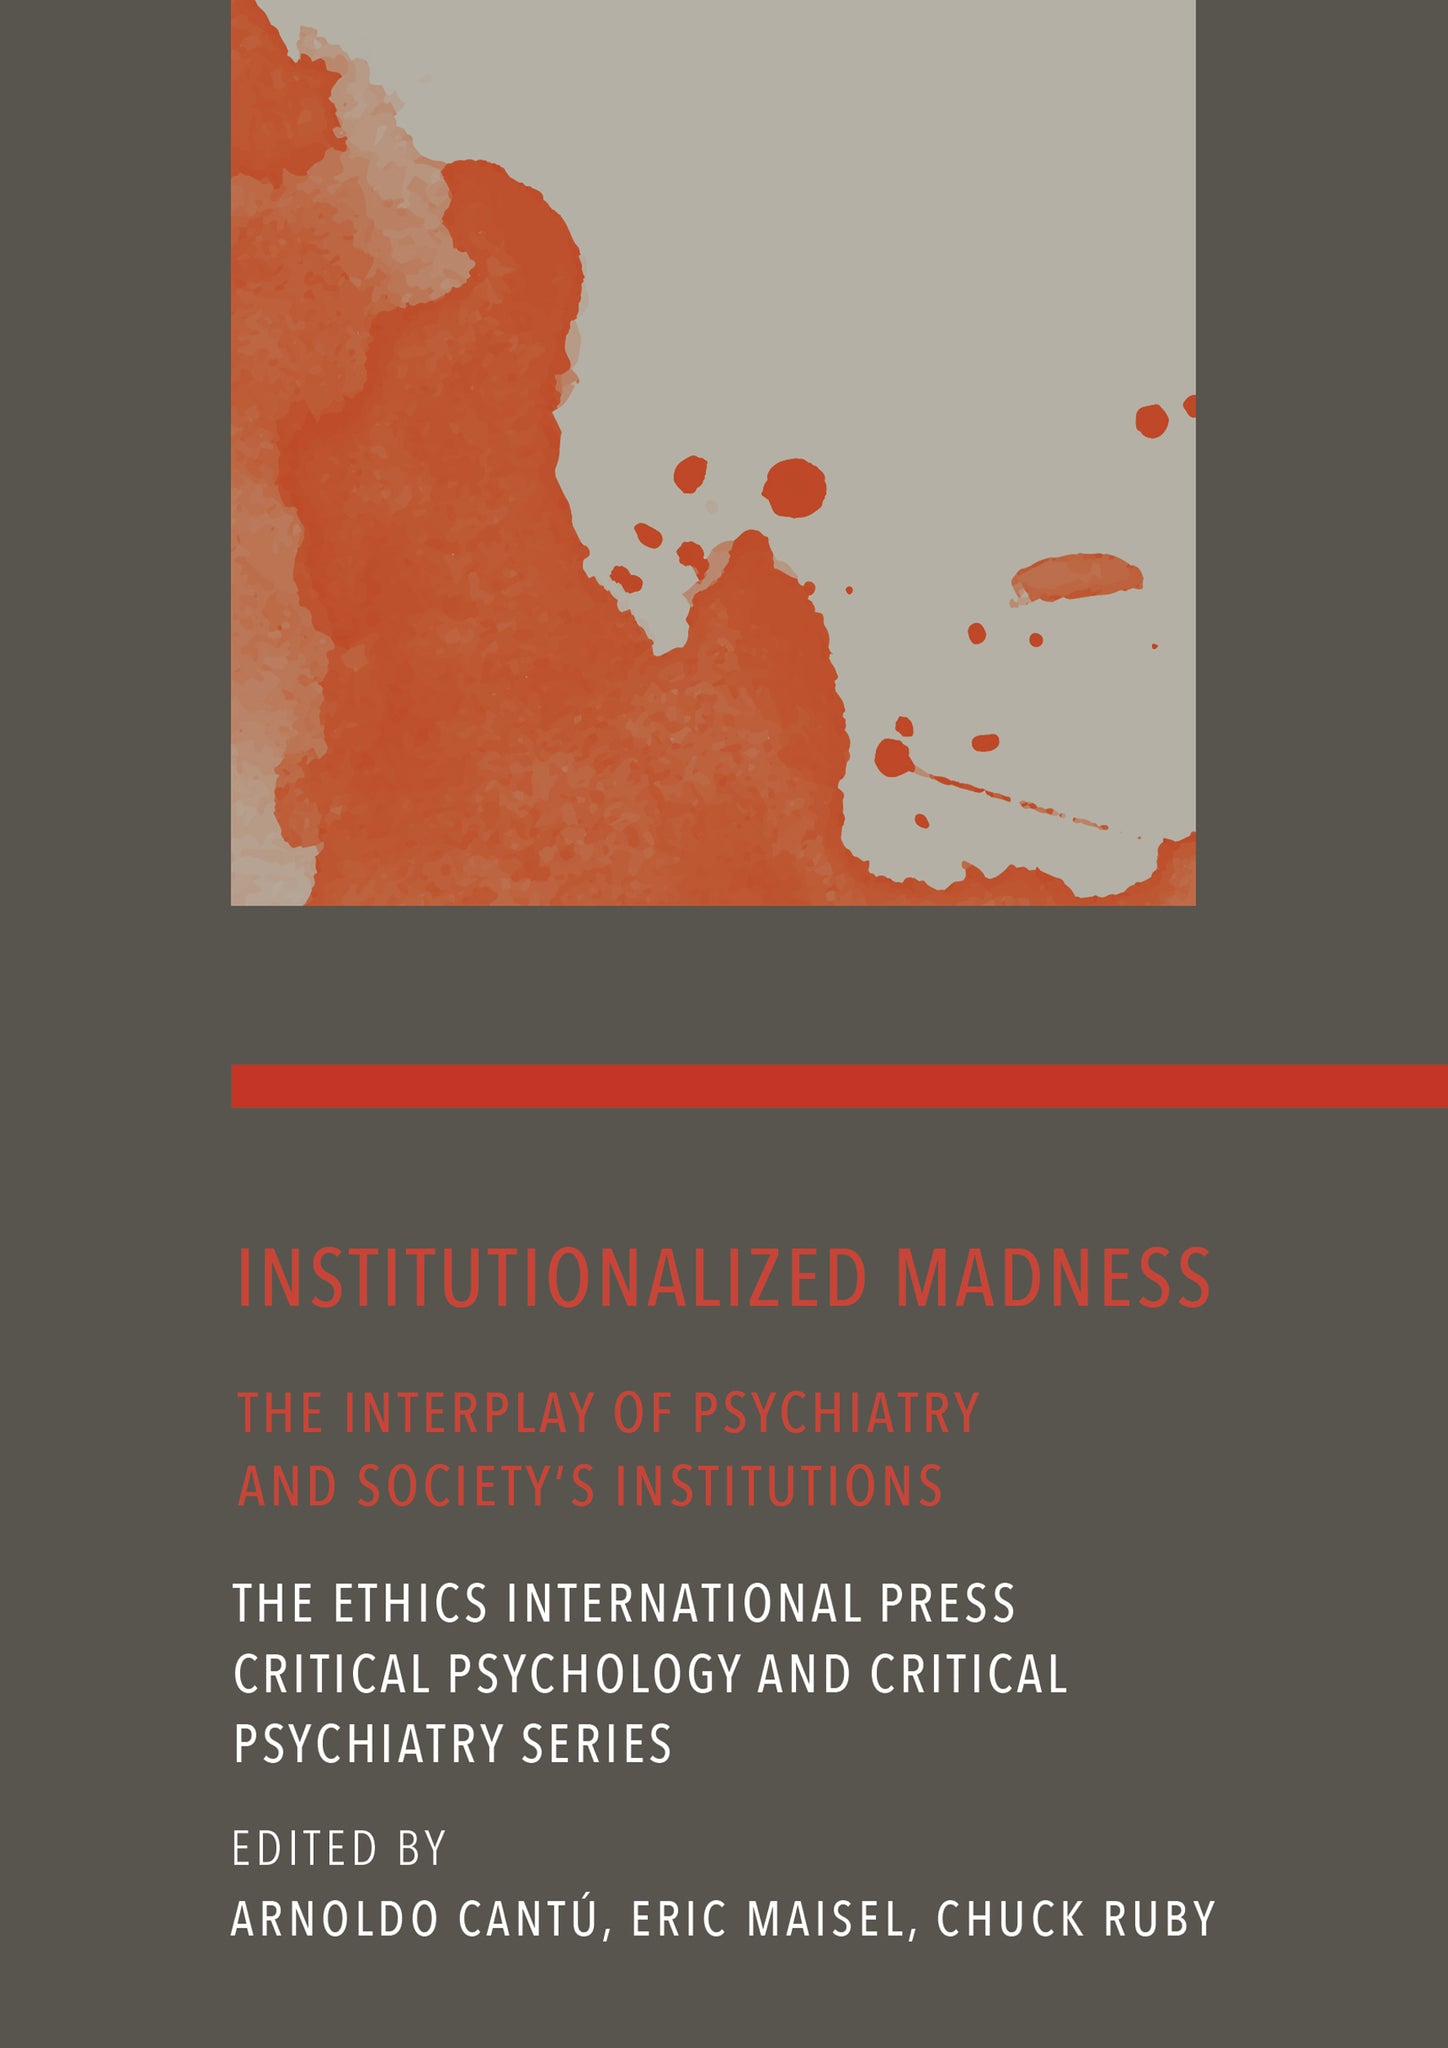 Institutionalized Madness: The Interplay of Psychiatry and Society’s Institutions